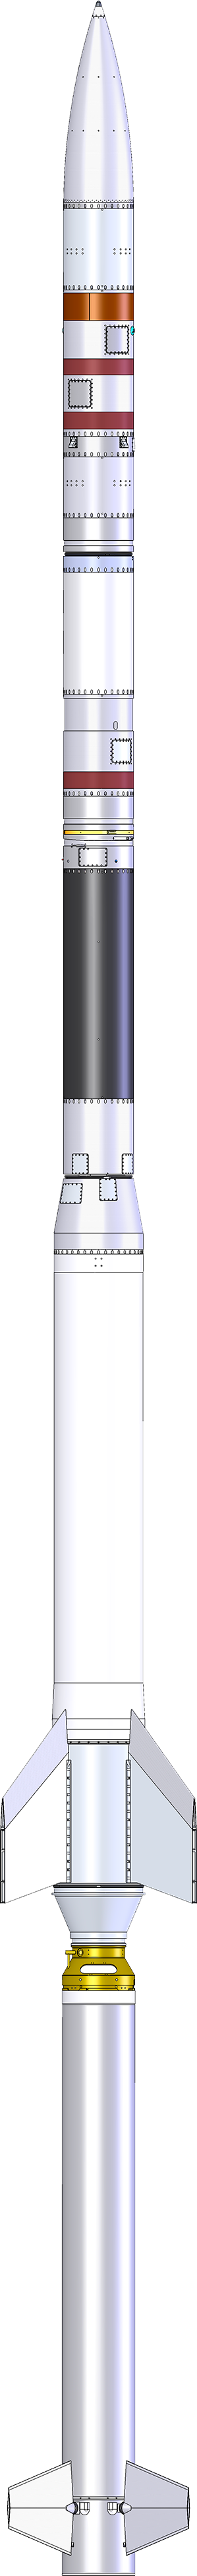 Drawing of the Oriole sounding rocket.